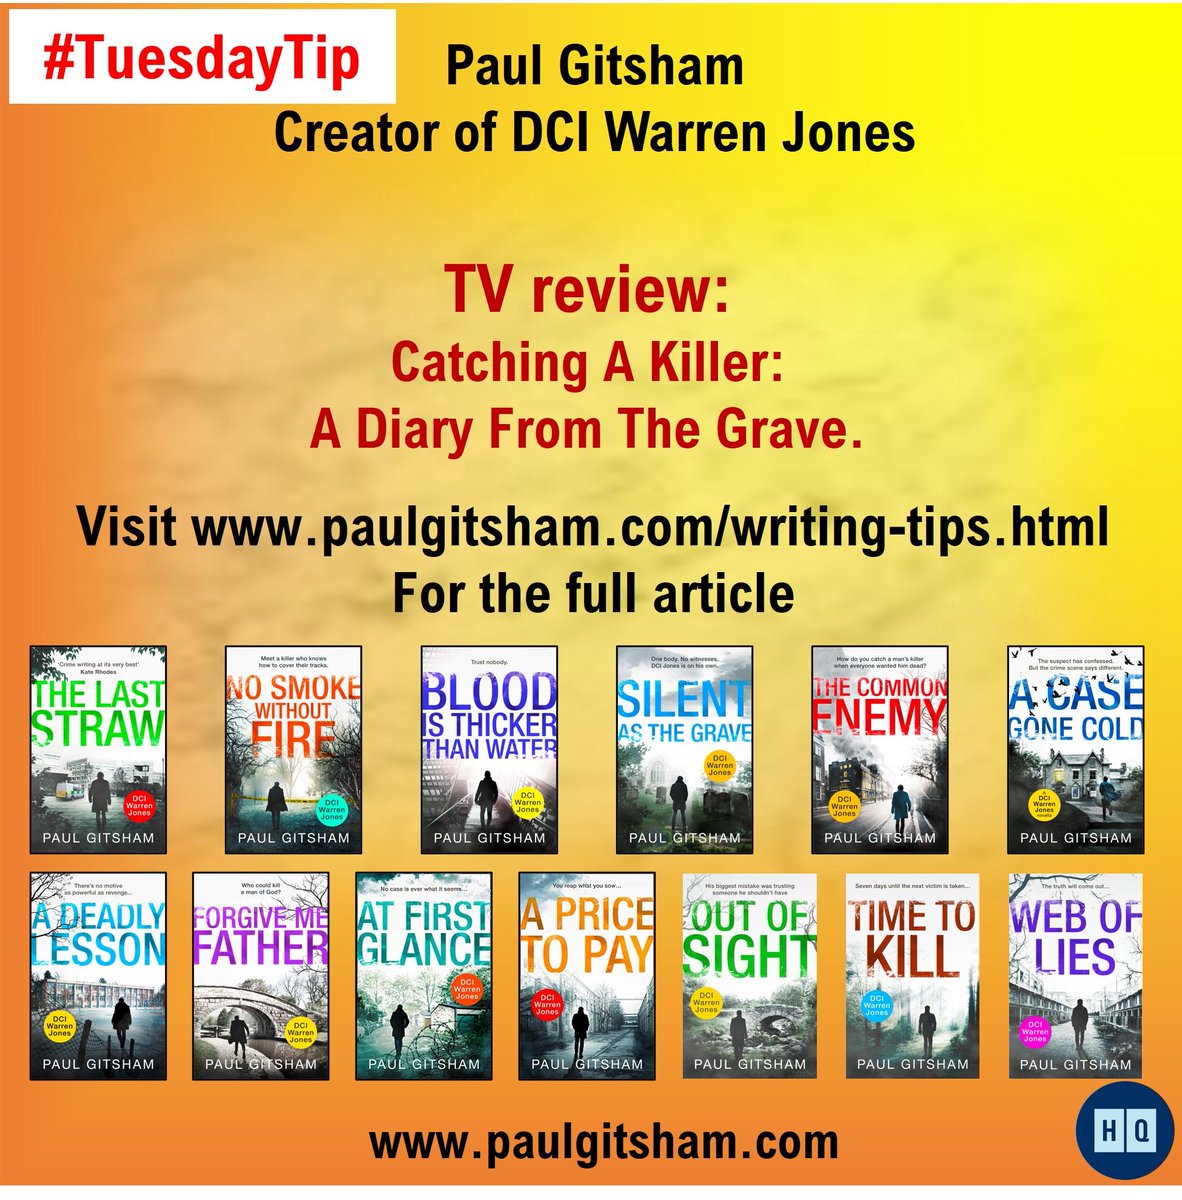 Welcome to this week's #TuesdayTip!
I'm no expert, but after 13 books I’ve learned some stuff.
'TV review: Catching A Killer: A Diary From The Grave.'
Follow the link paulgitsham.com/writing-tips/t…
R U a writer with a tip? DM me
#WritingTips
#RecommendedWatch
@Channel4
@CrimeReaders